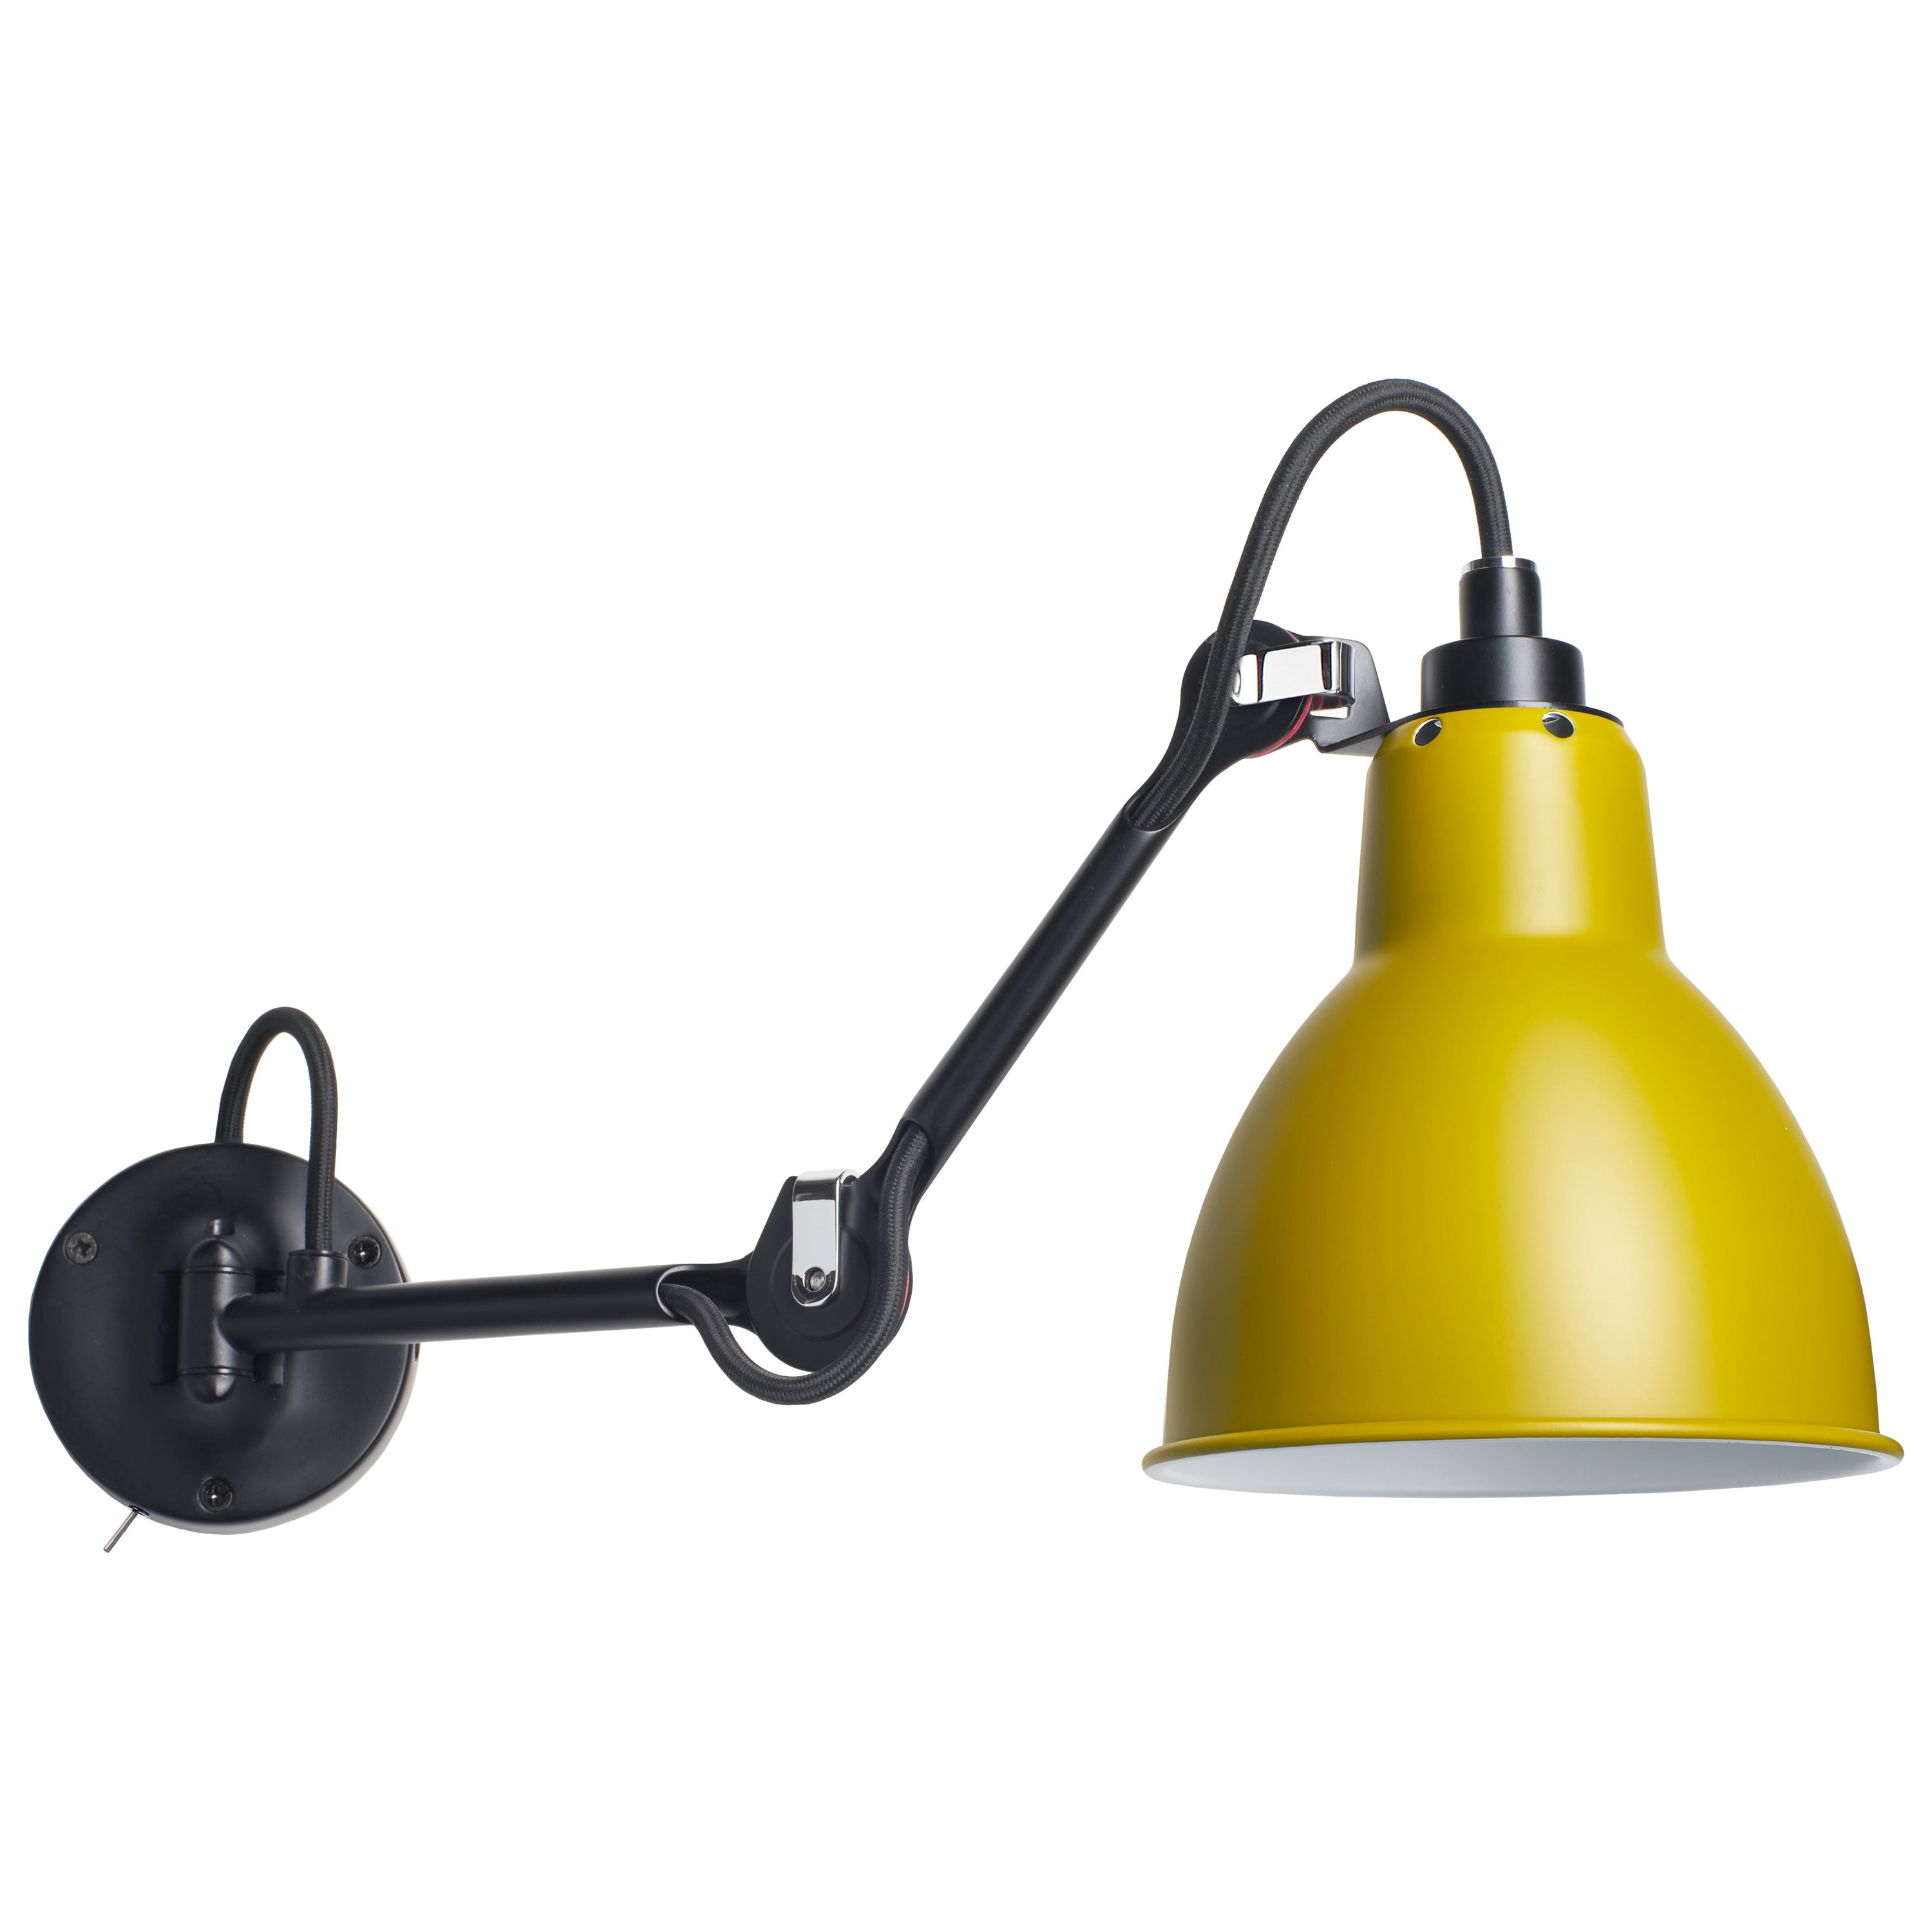 DCW Editions La Lampe Gras N°204 SW Wall Lamp in Black Steel Arm & Yellow Shade For Sale